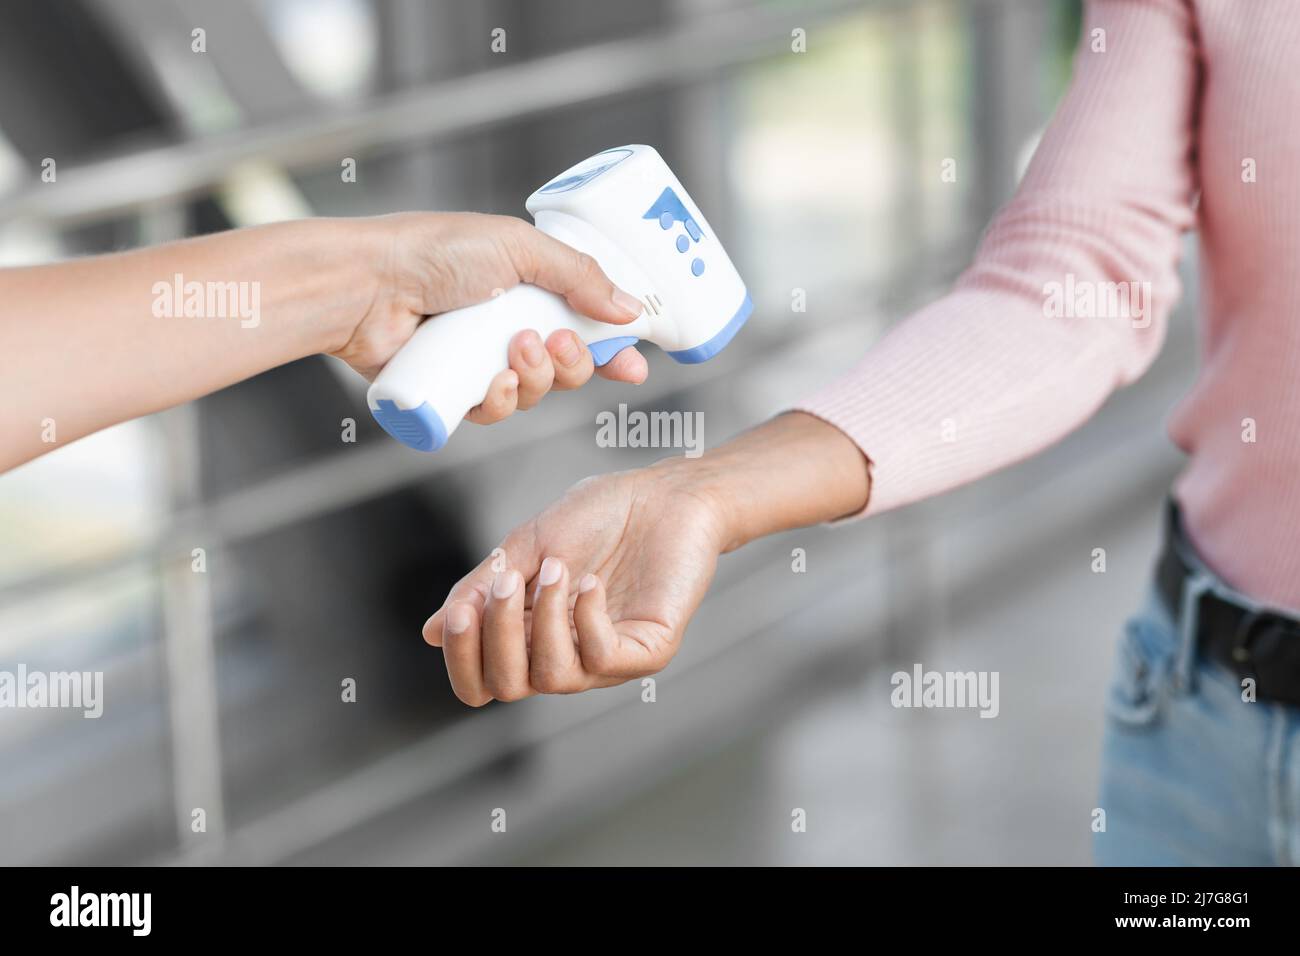 Temperature Control. Security Stuff Using Electronic Medical Thermometer To Female At Airport Stock Photo